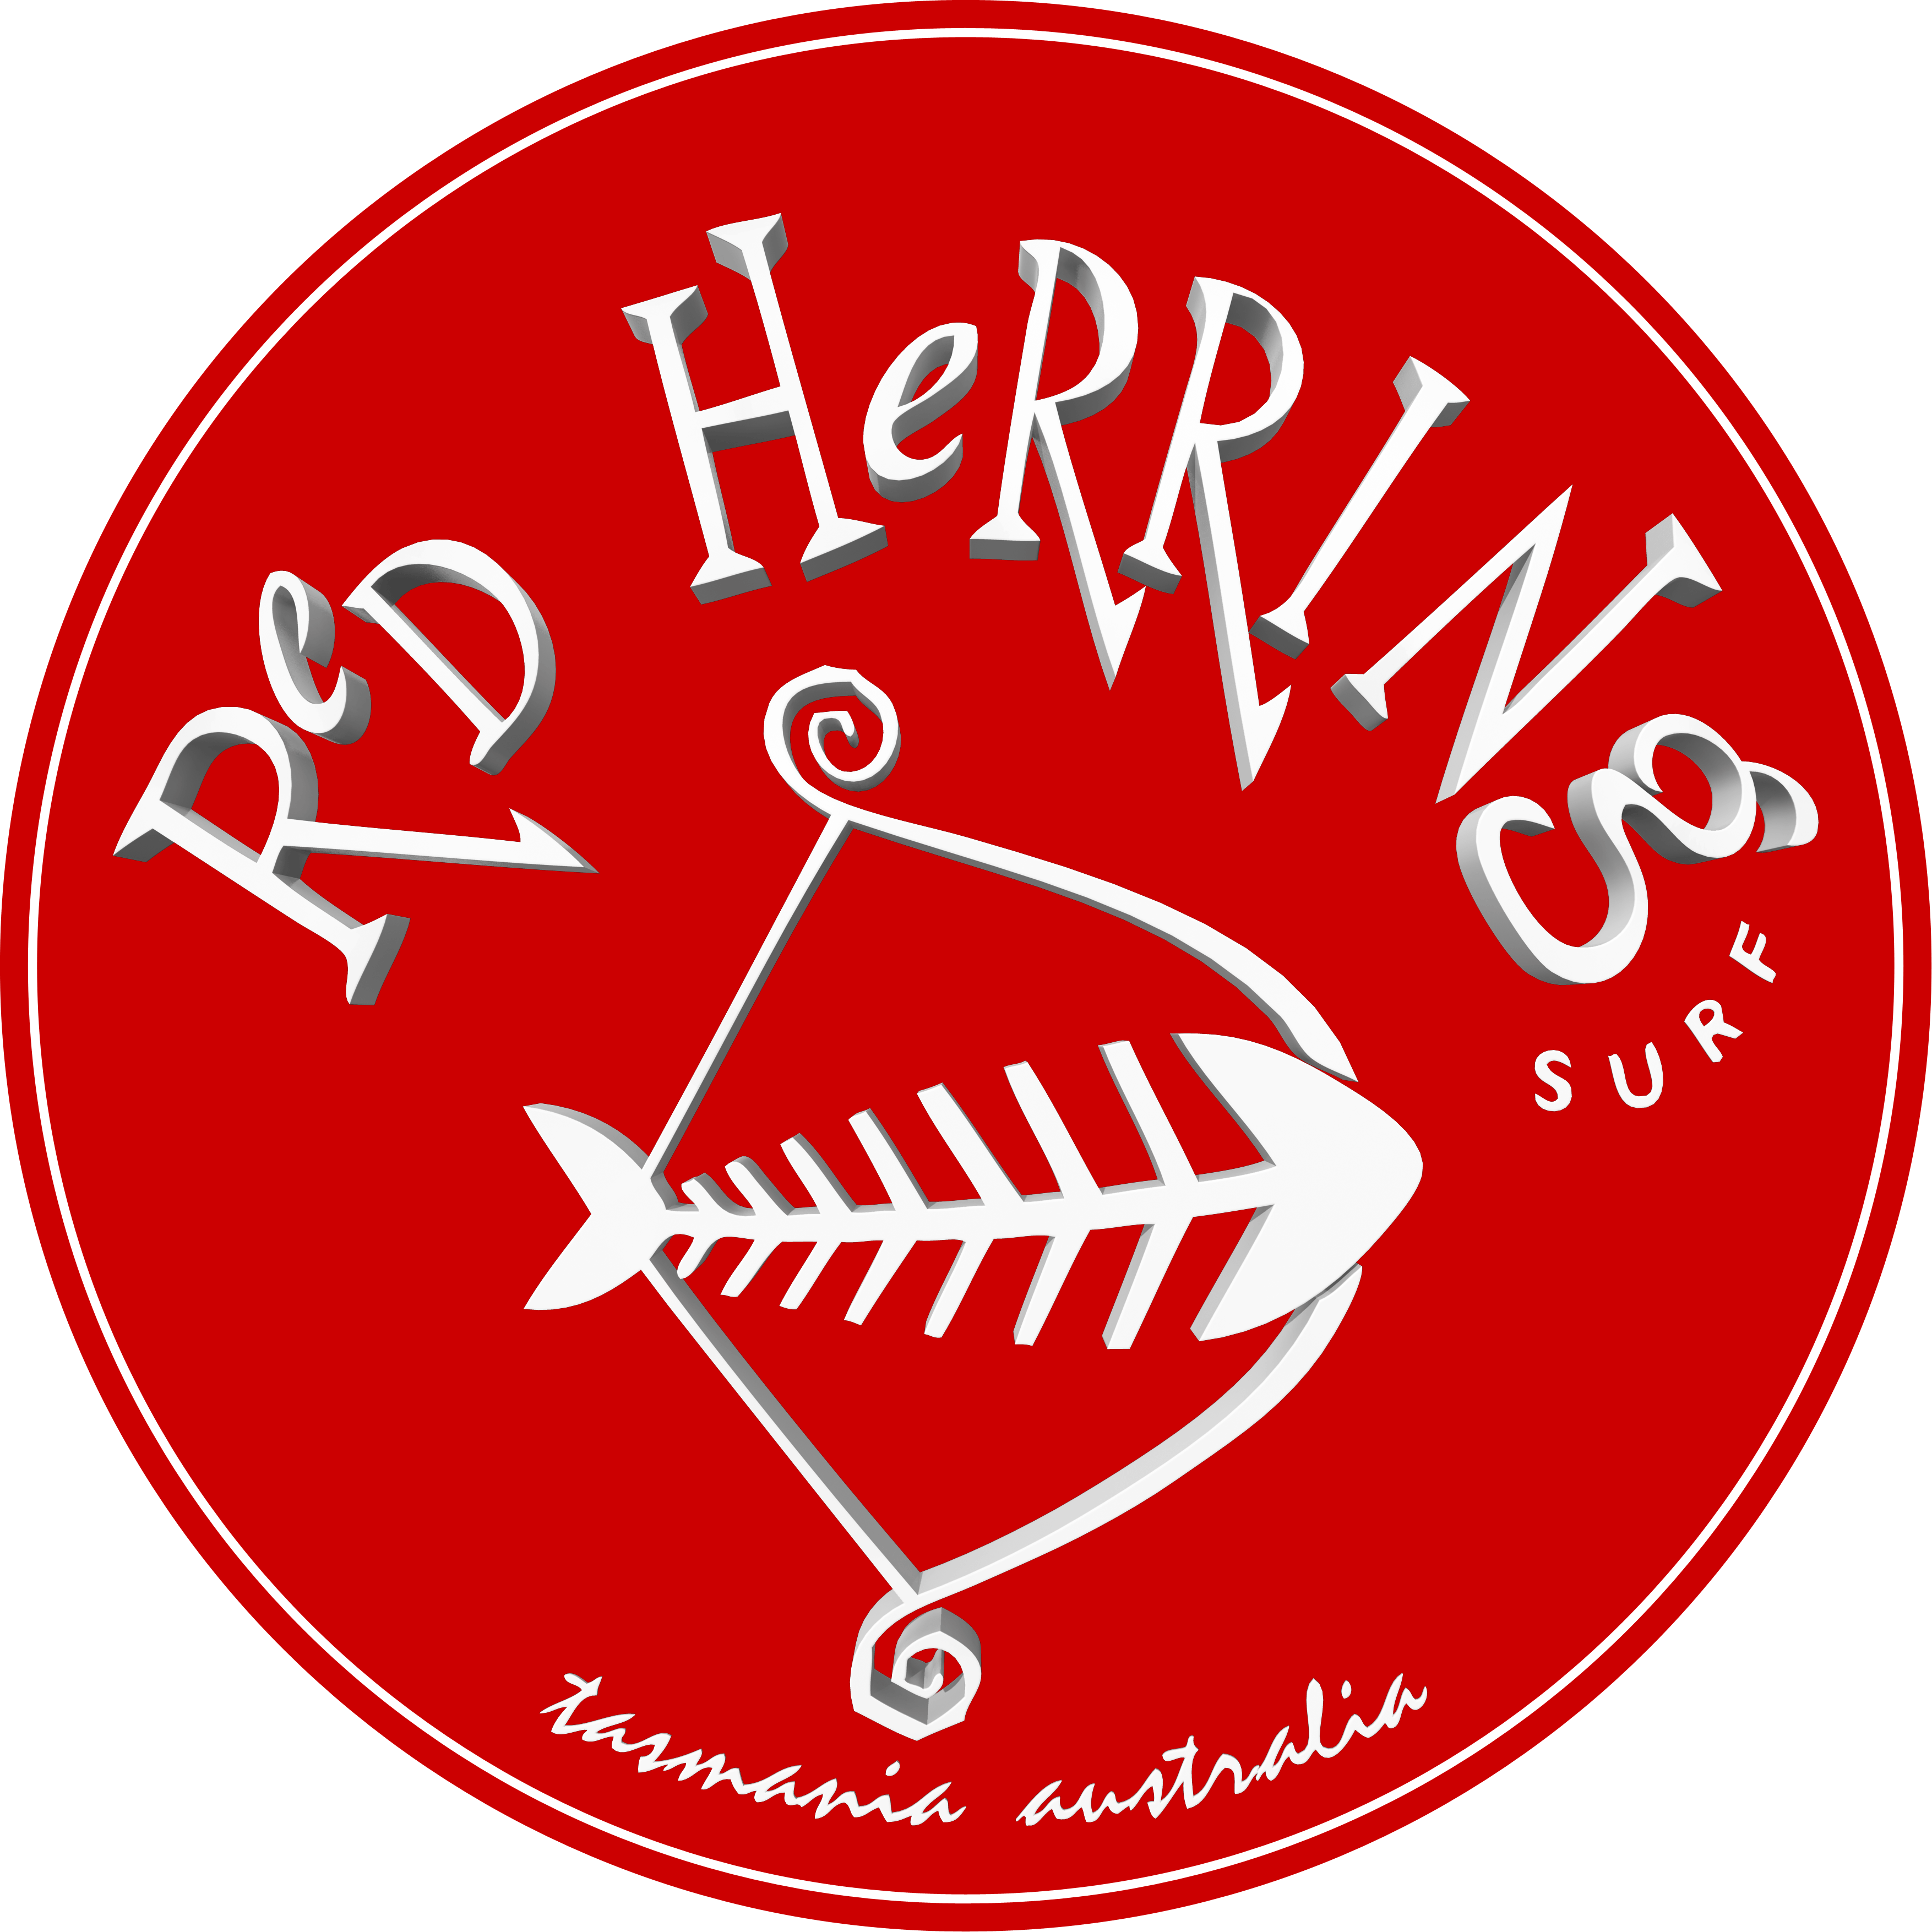 Red Surfer Logo - Opinions on Red Herring Surf